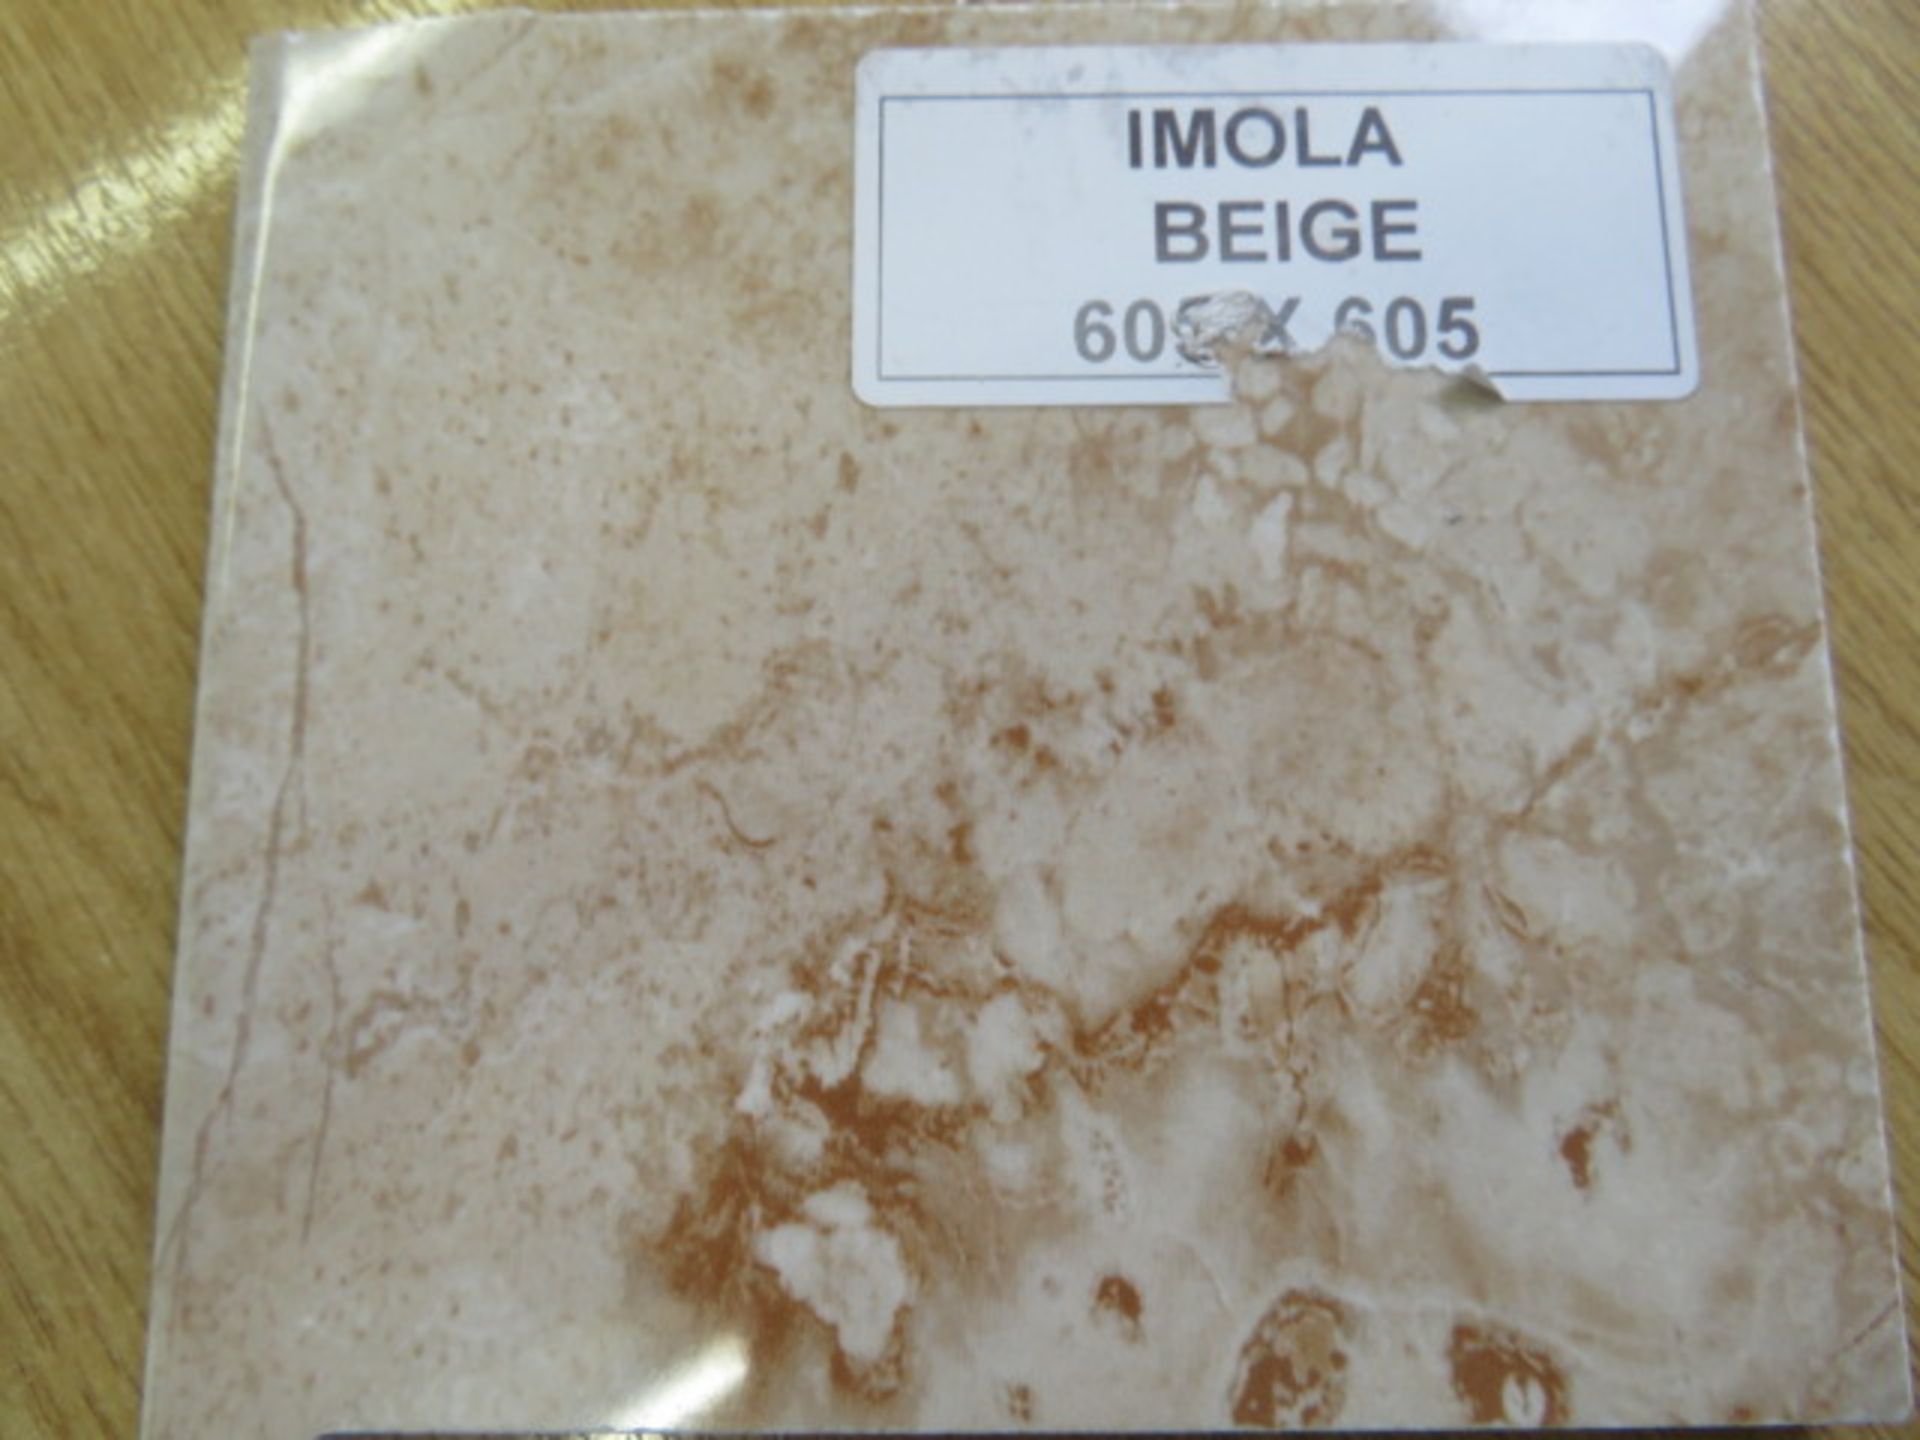 NEW 8.76m2 Imola Beige Wall and Floor Tiles. 605x605mm per tile, 10mm thick. This tile has a ... - Bild 3 aus 3